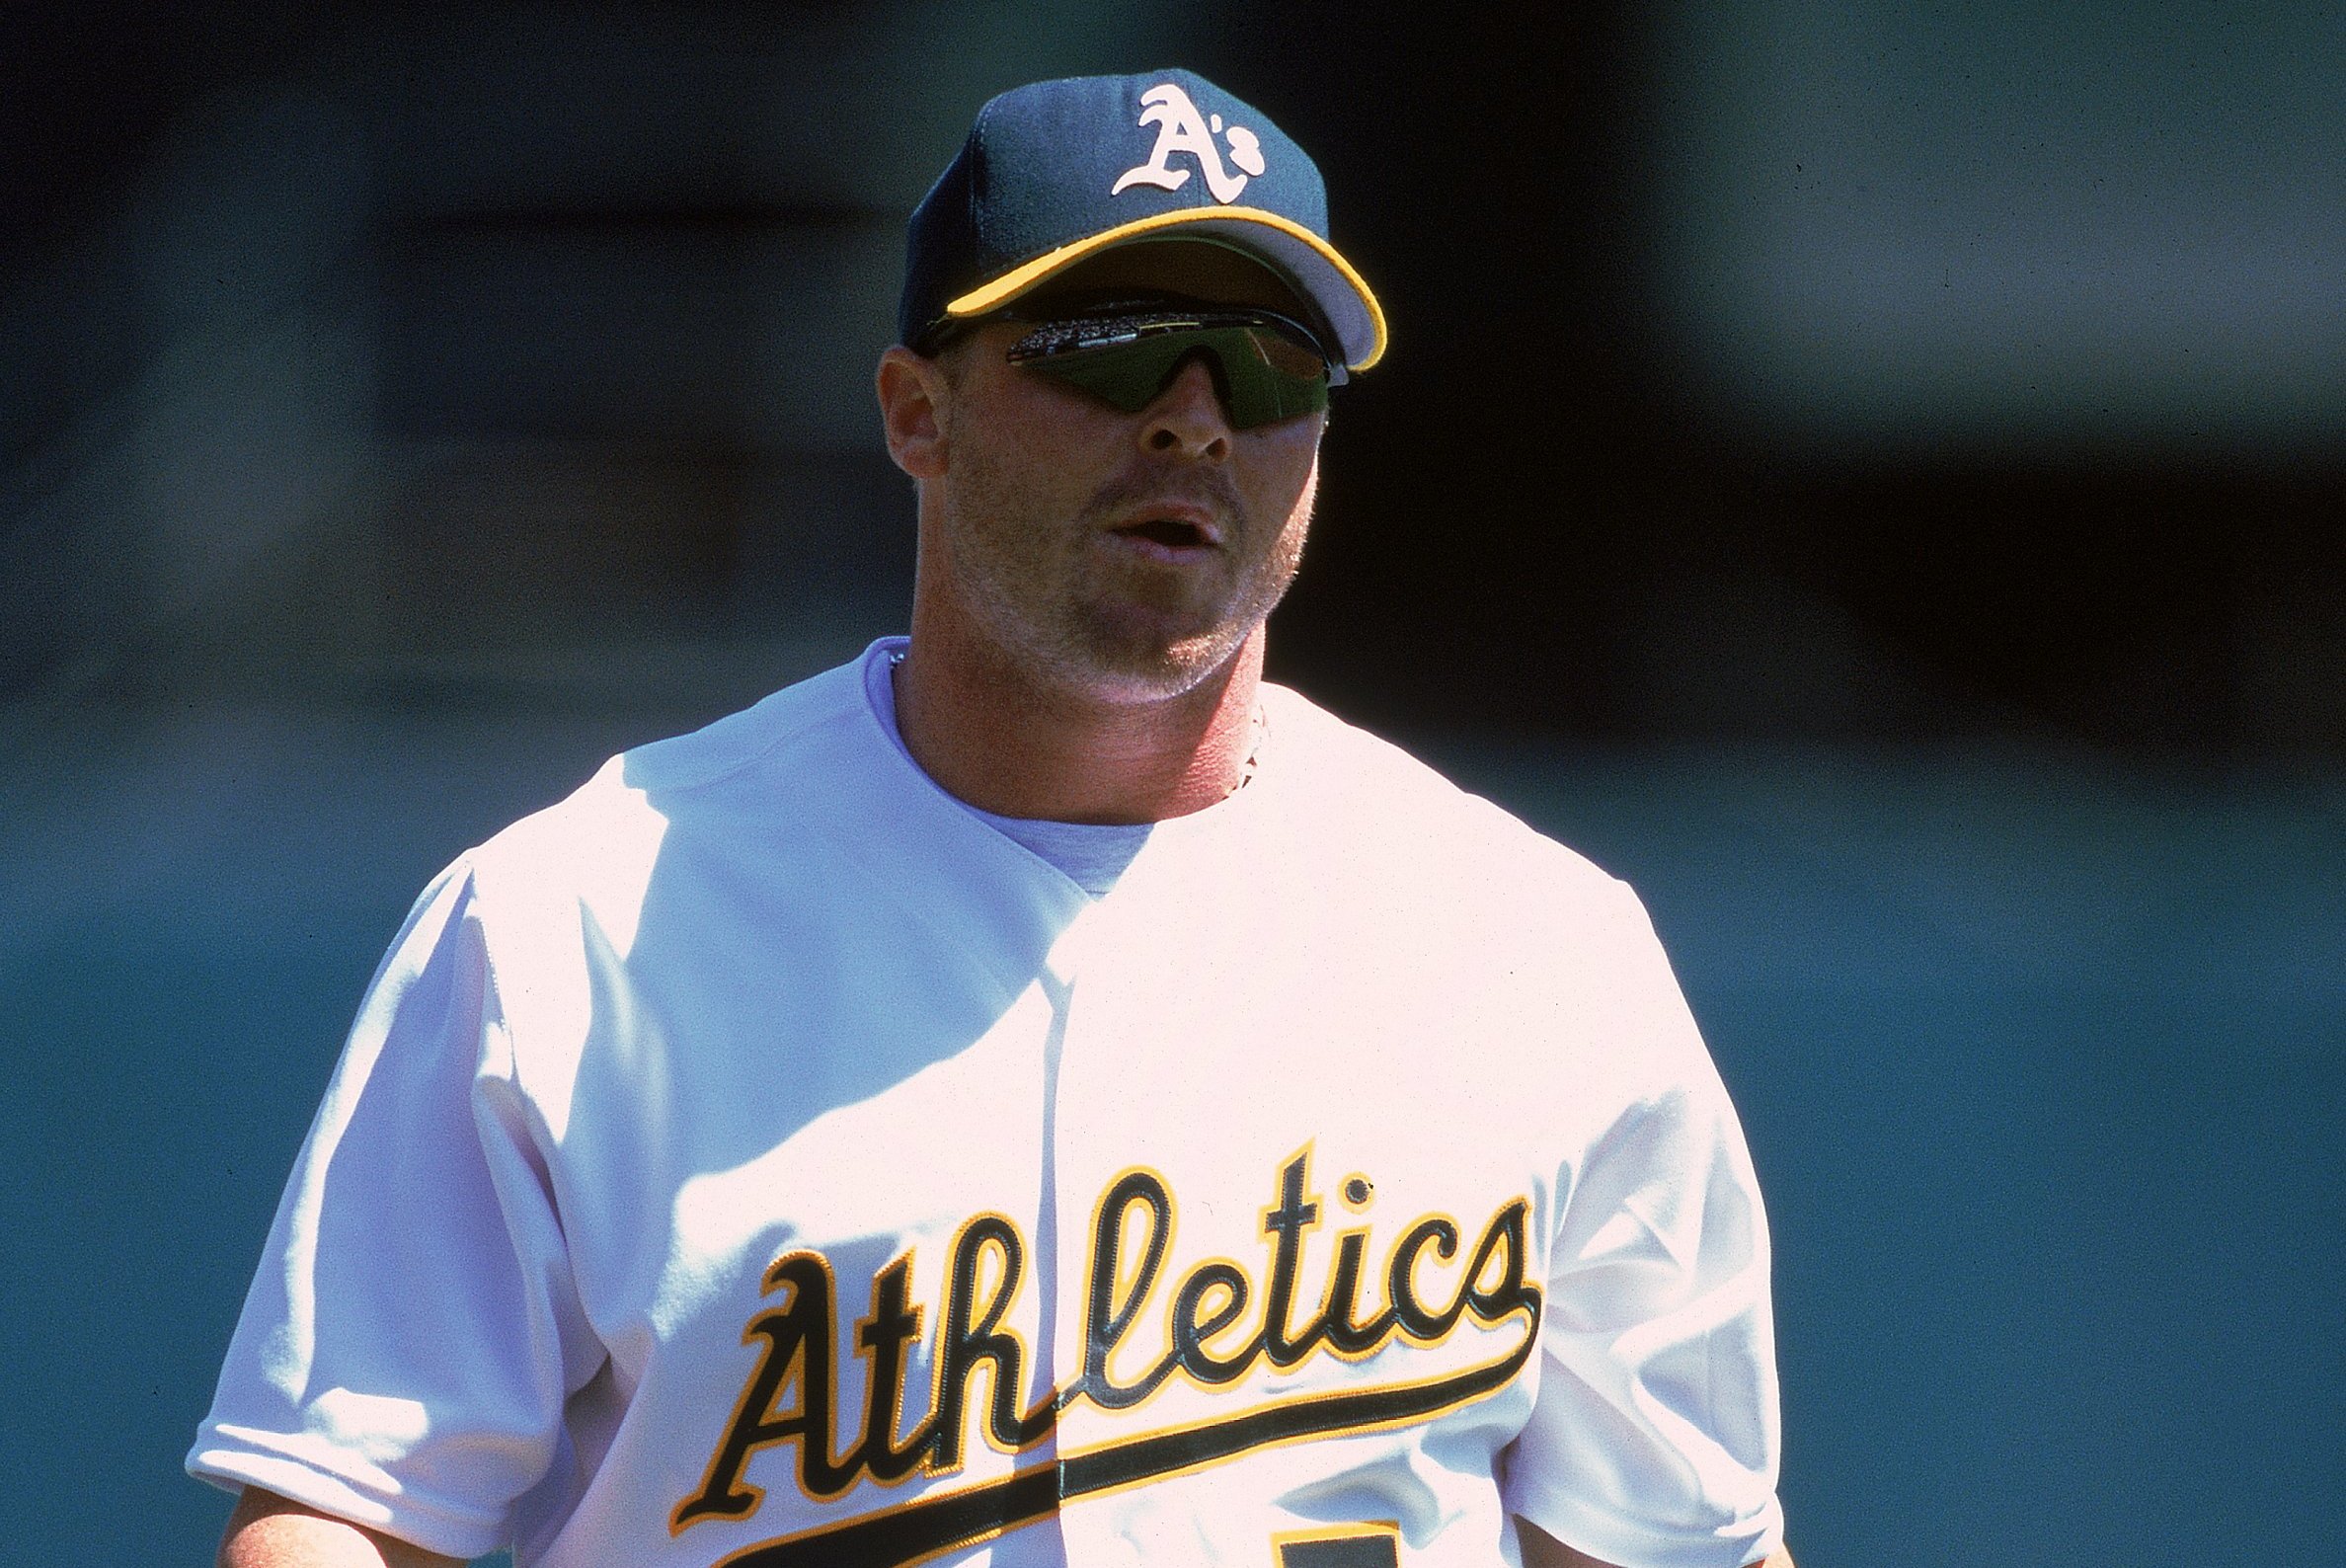 Former Oakland A's player Jeremy Giambi dies at age of 47